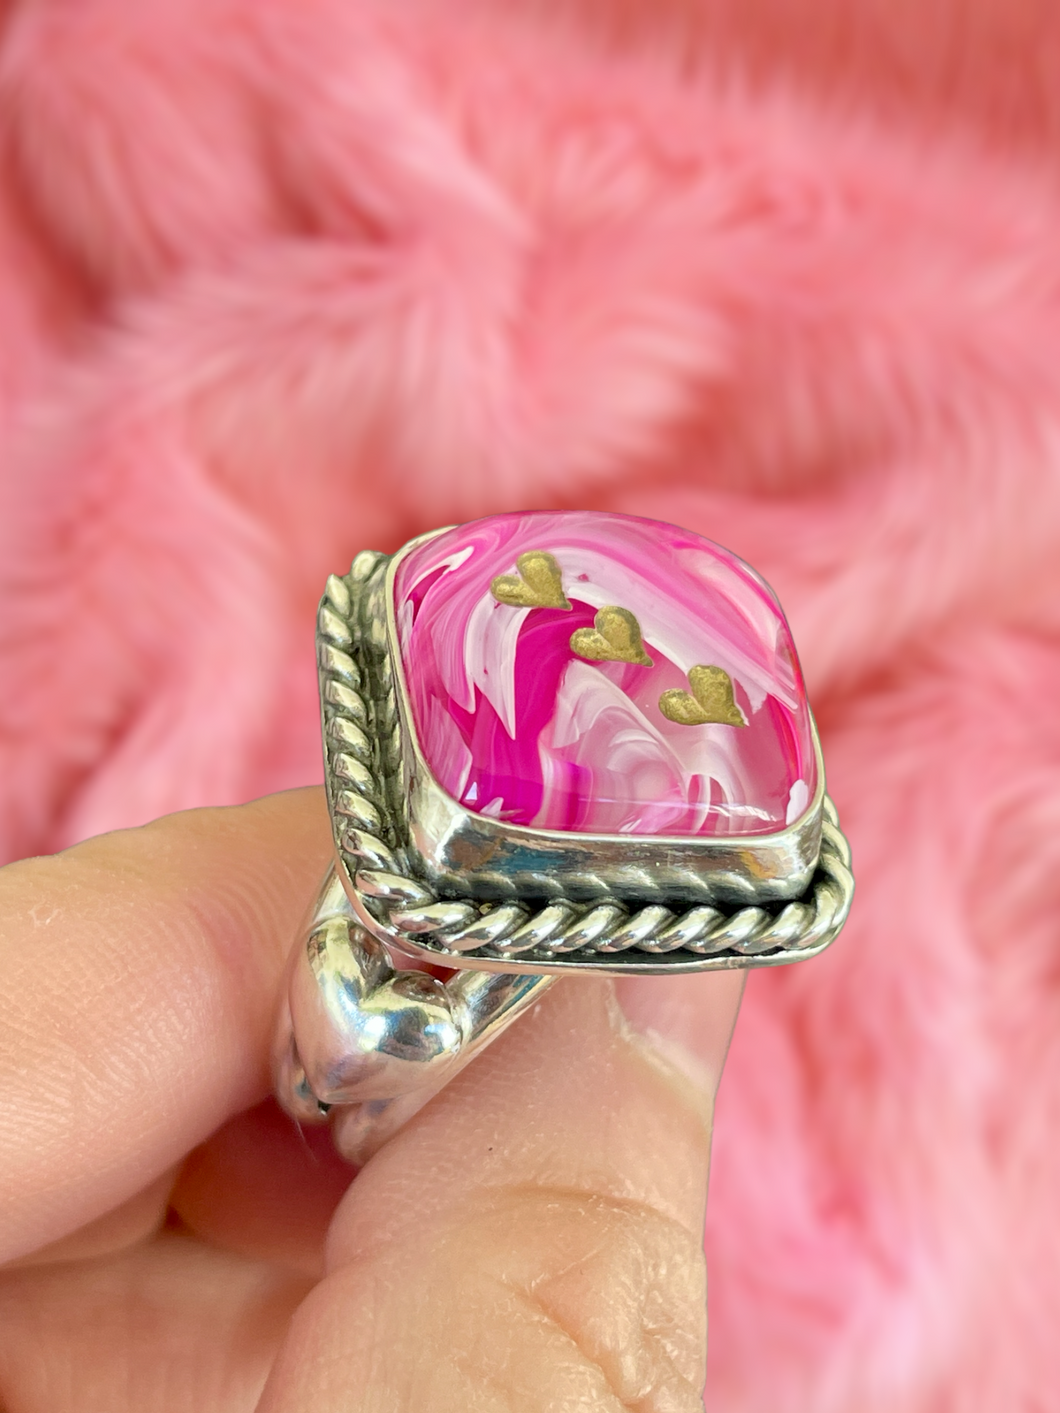 Pink Dice Ring Customs available